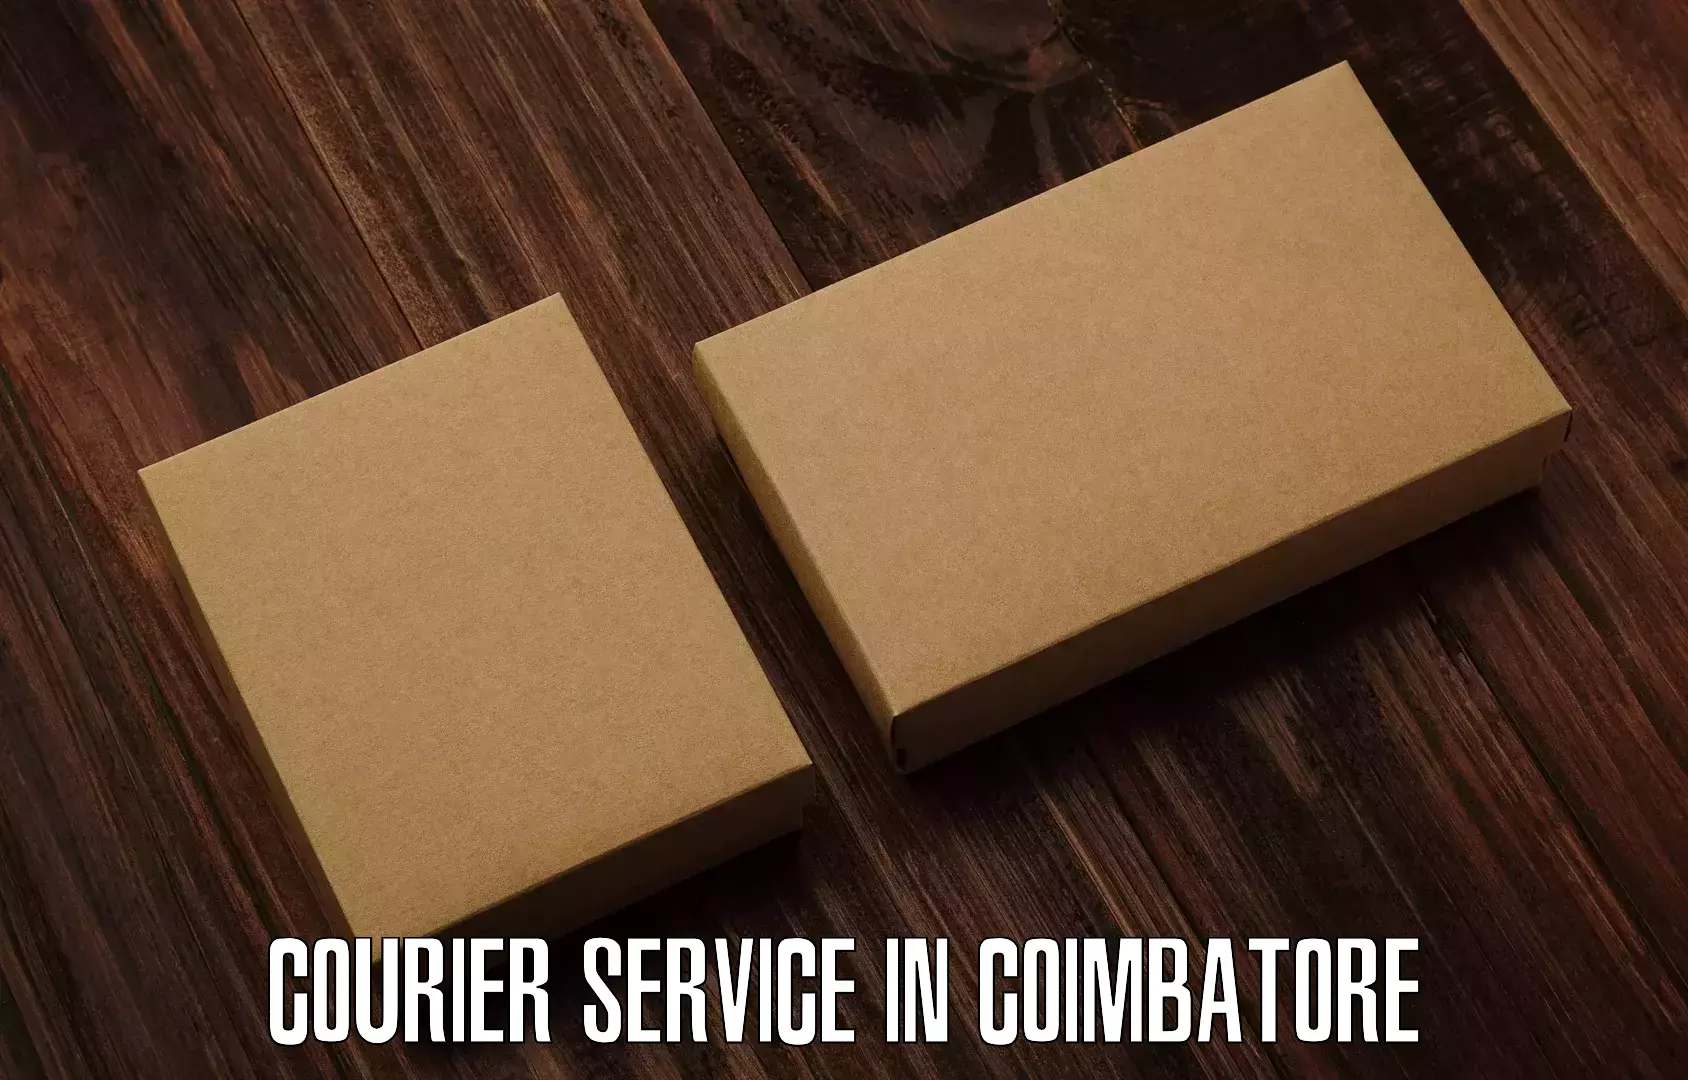 Customer-friendly courier services in Coimbatore